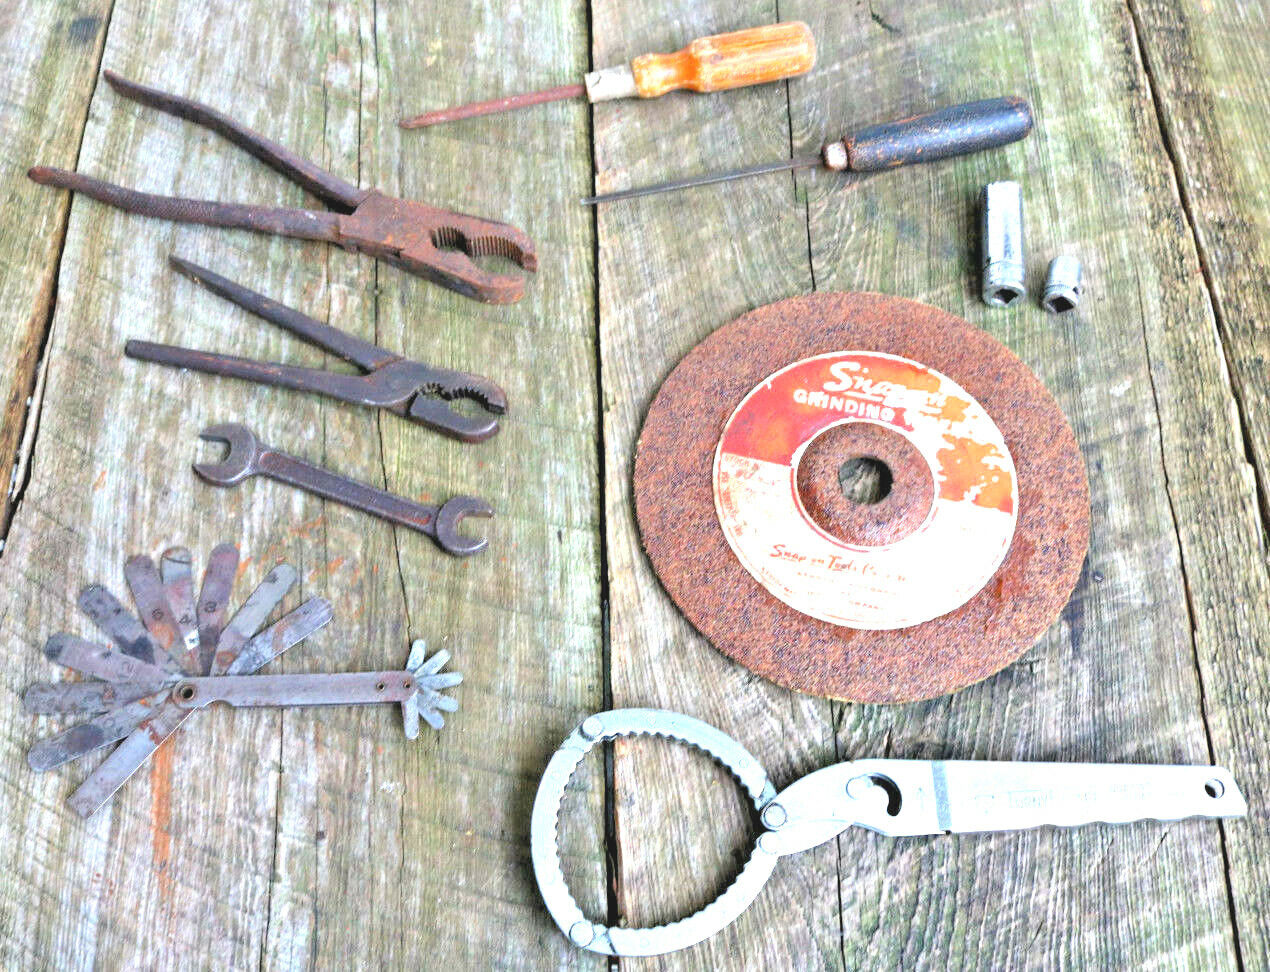 Mixed LOT Old Vintage Tools Snap On Socket USA Made Pliers Unusual OLD Garage XT